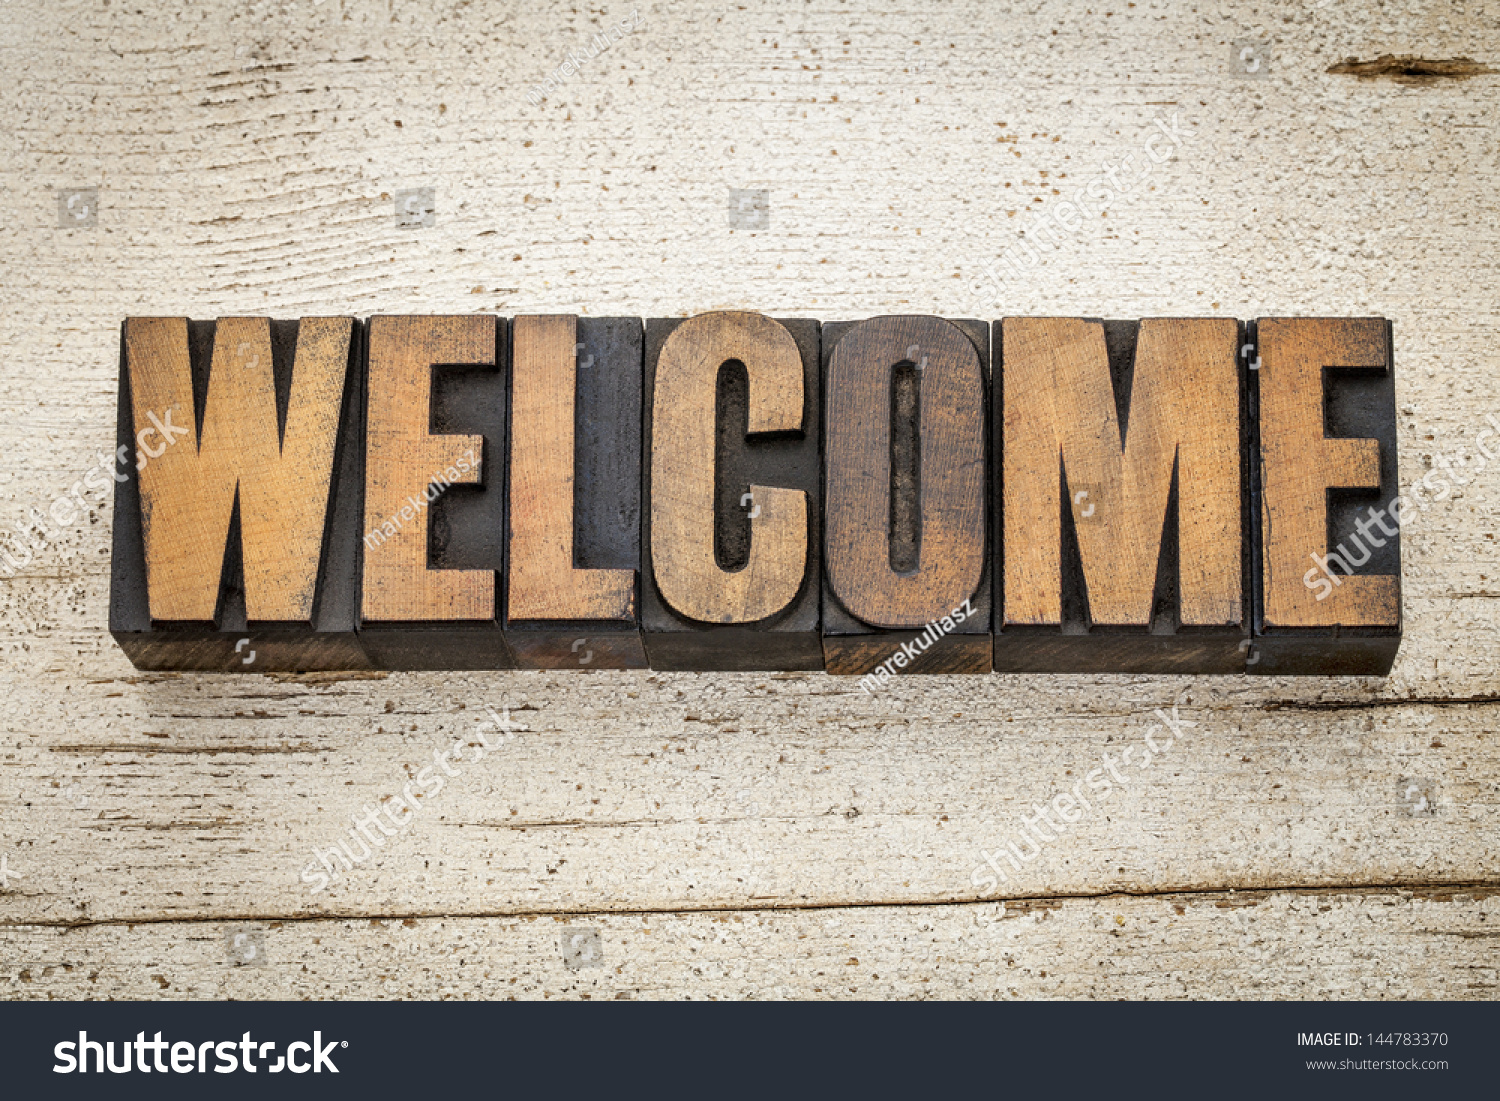 Steam welcome sign фото 114